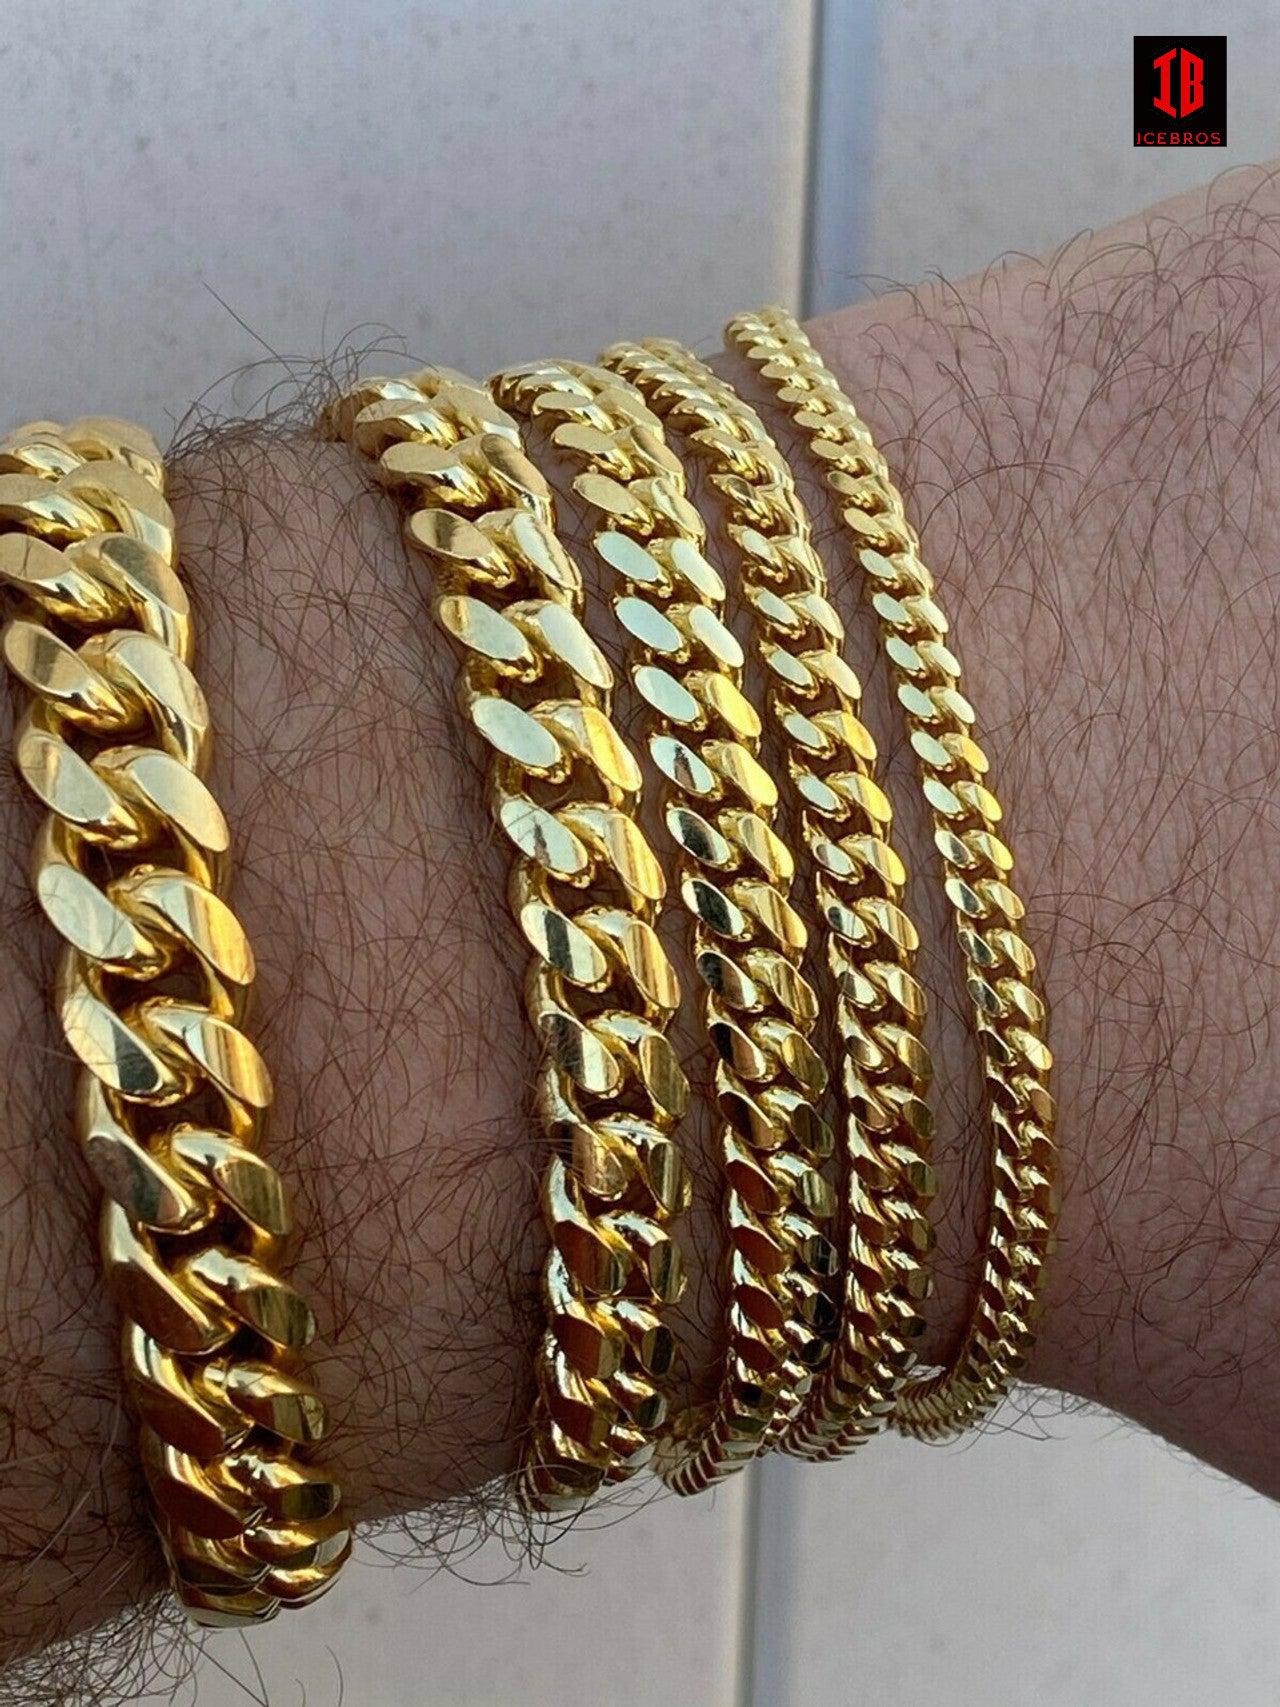 Miami Cuban Link Bracelet With Box Lock 14k Gold Over Solid 925 Silver ITALY